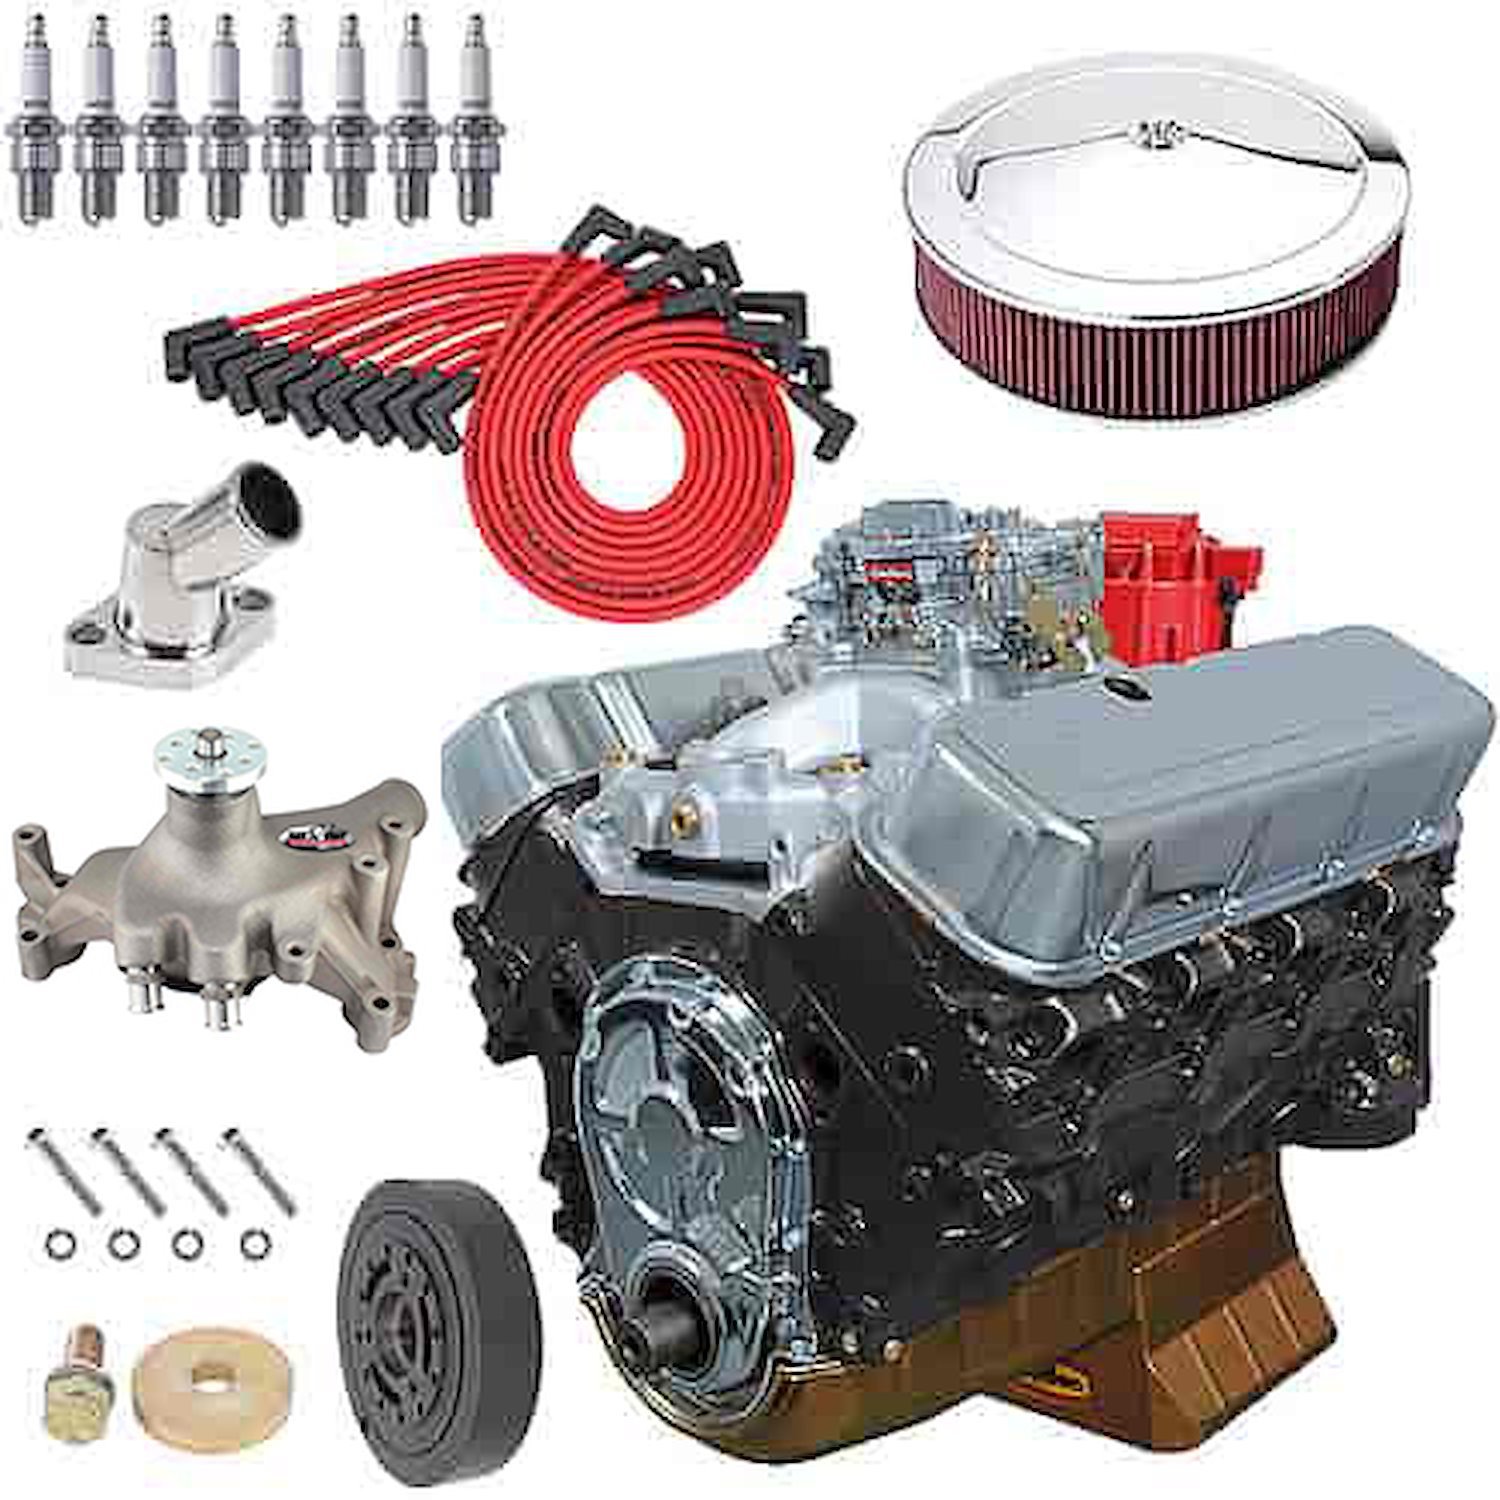 Big Block Chevy 496ci Dress Engine Kit, Includes: Water Pump & Bolts